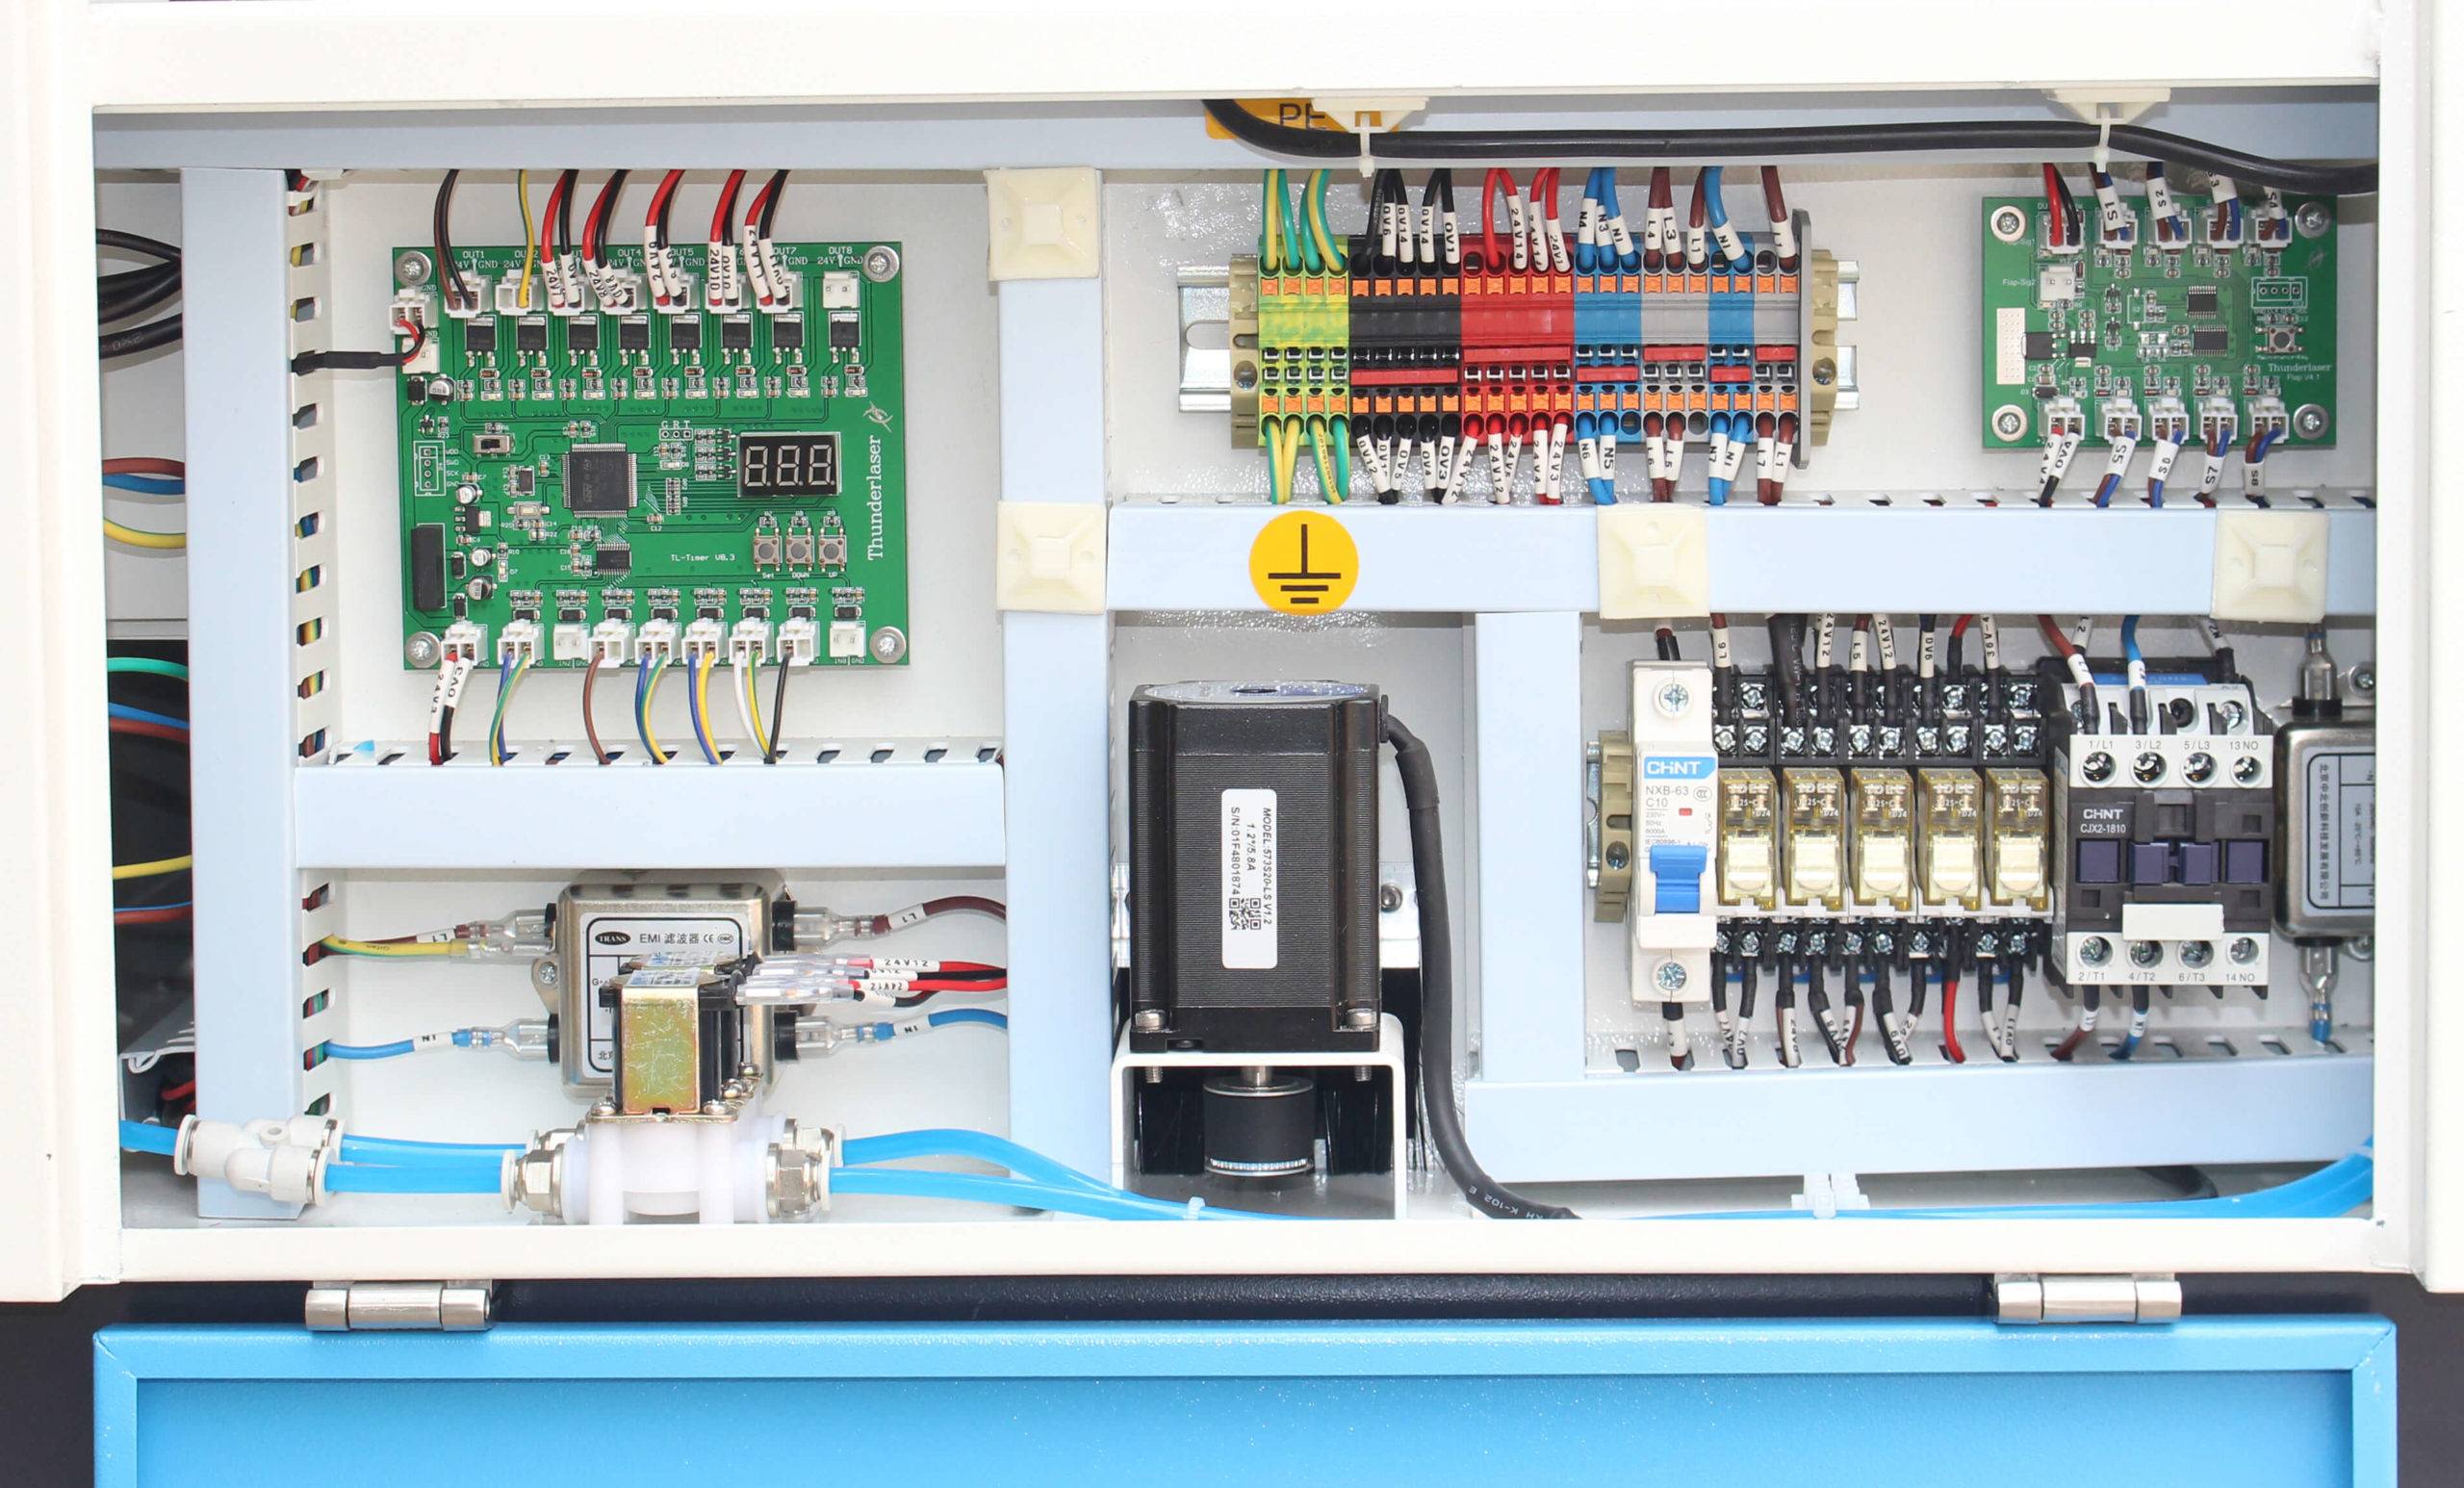 9.2 Electronic Control System